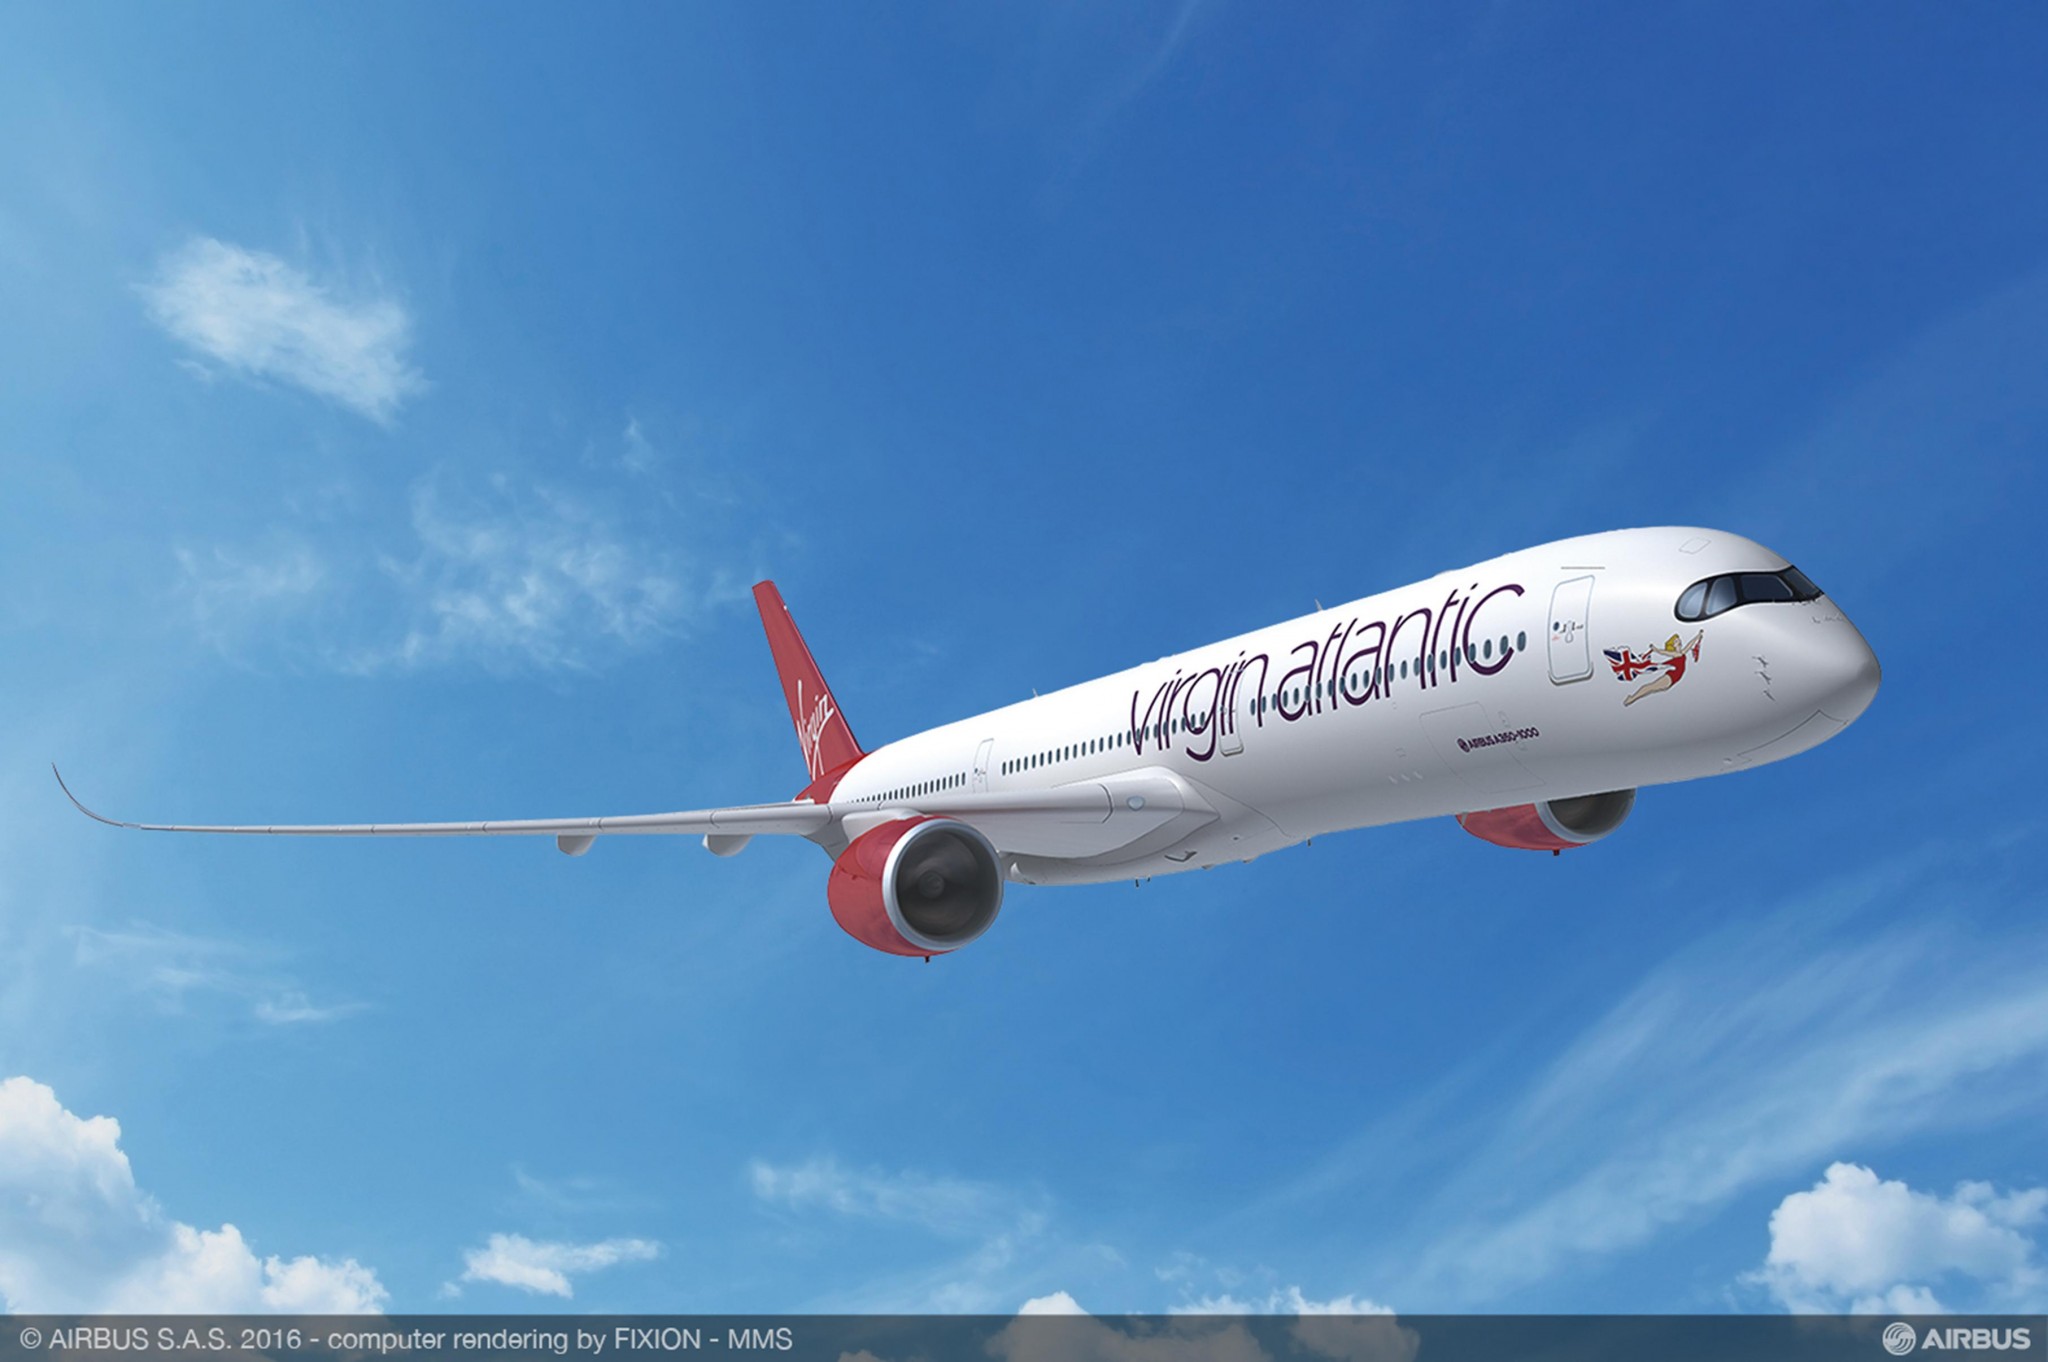 Delta and Virgin Atlantic to fully co-locate at Heathrow Terminal 3